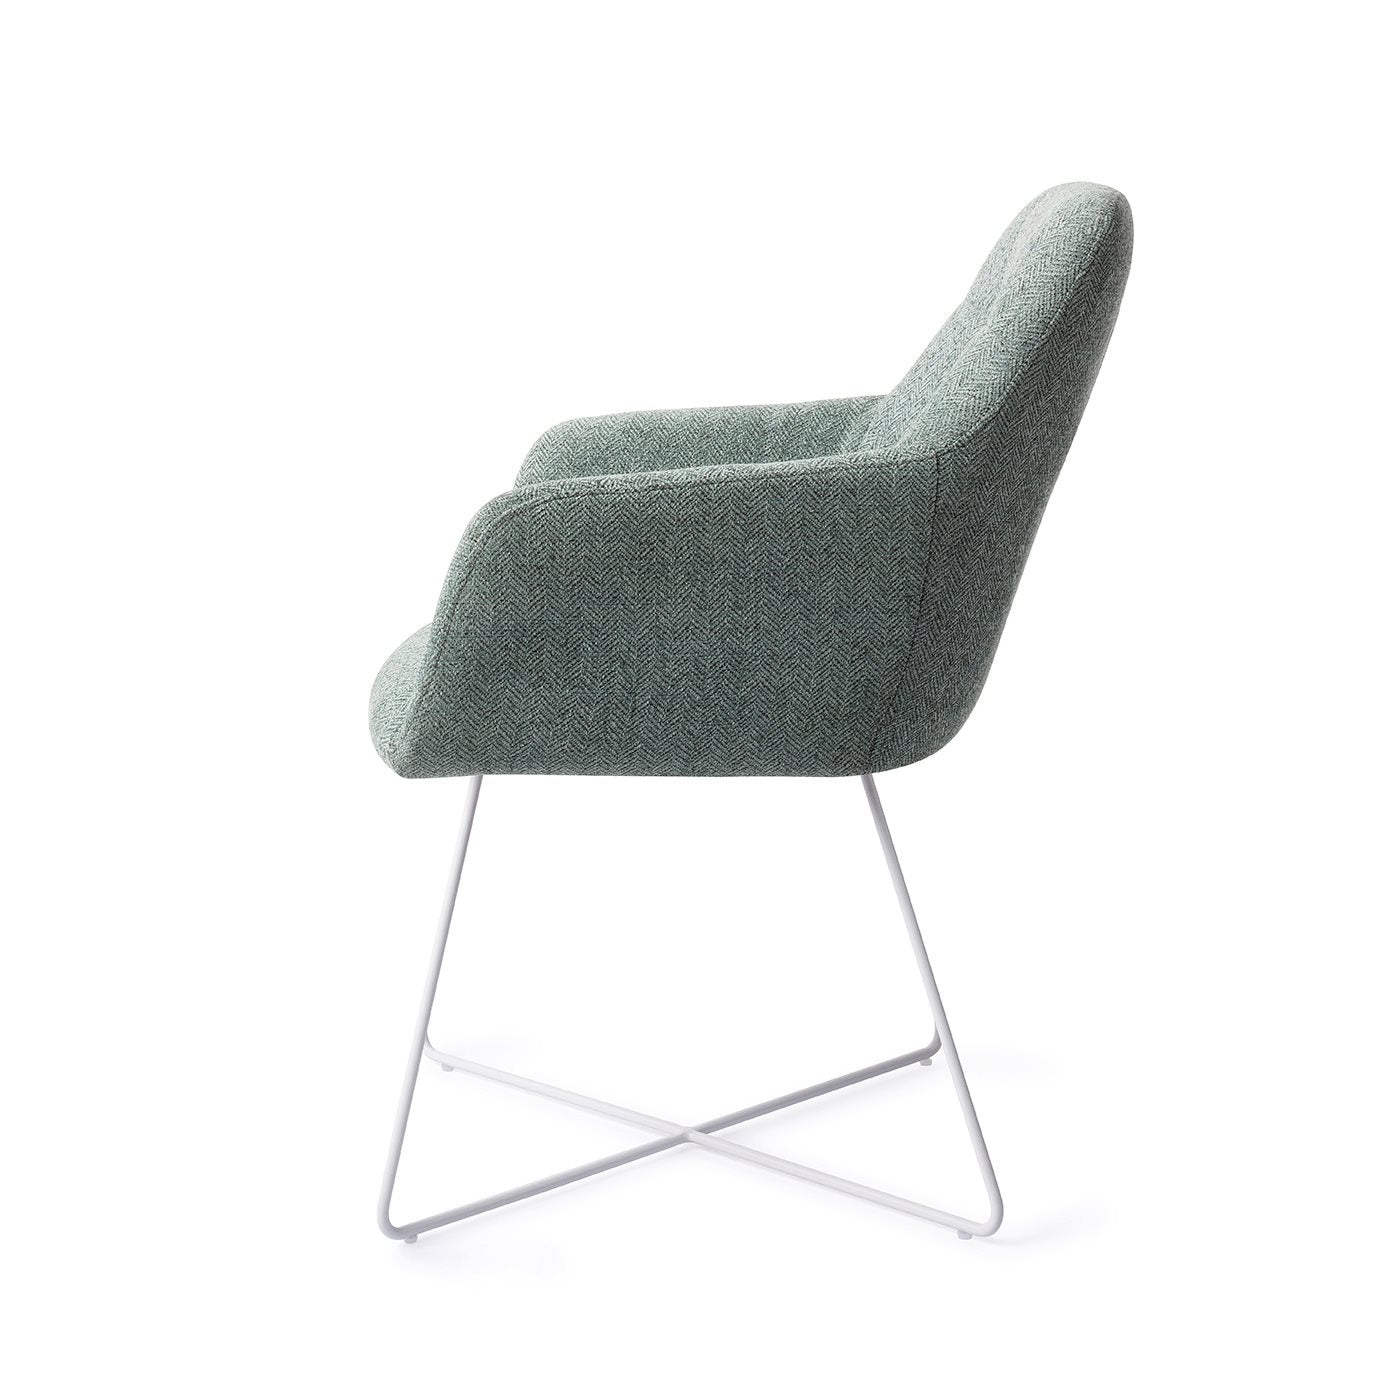 Noto Dining Chair Real Teal Cross White